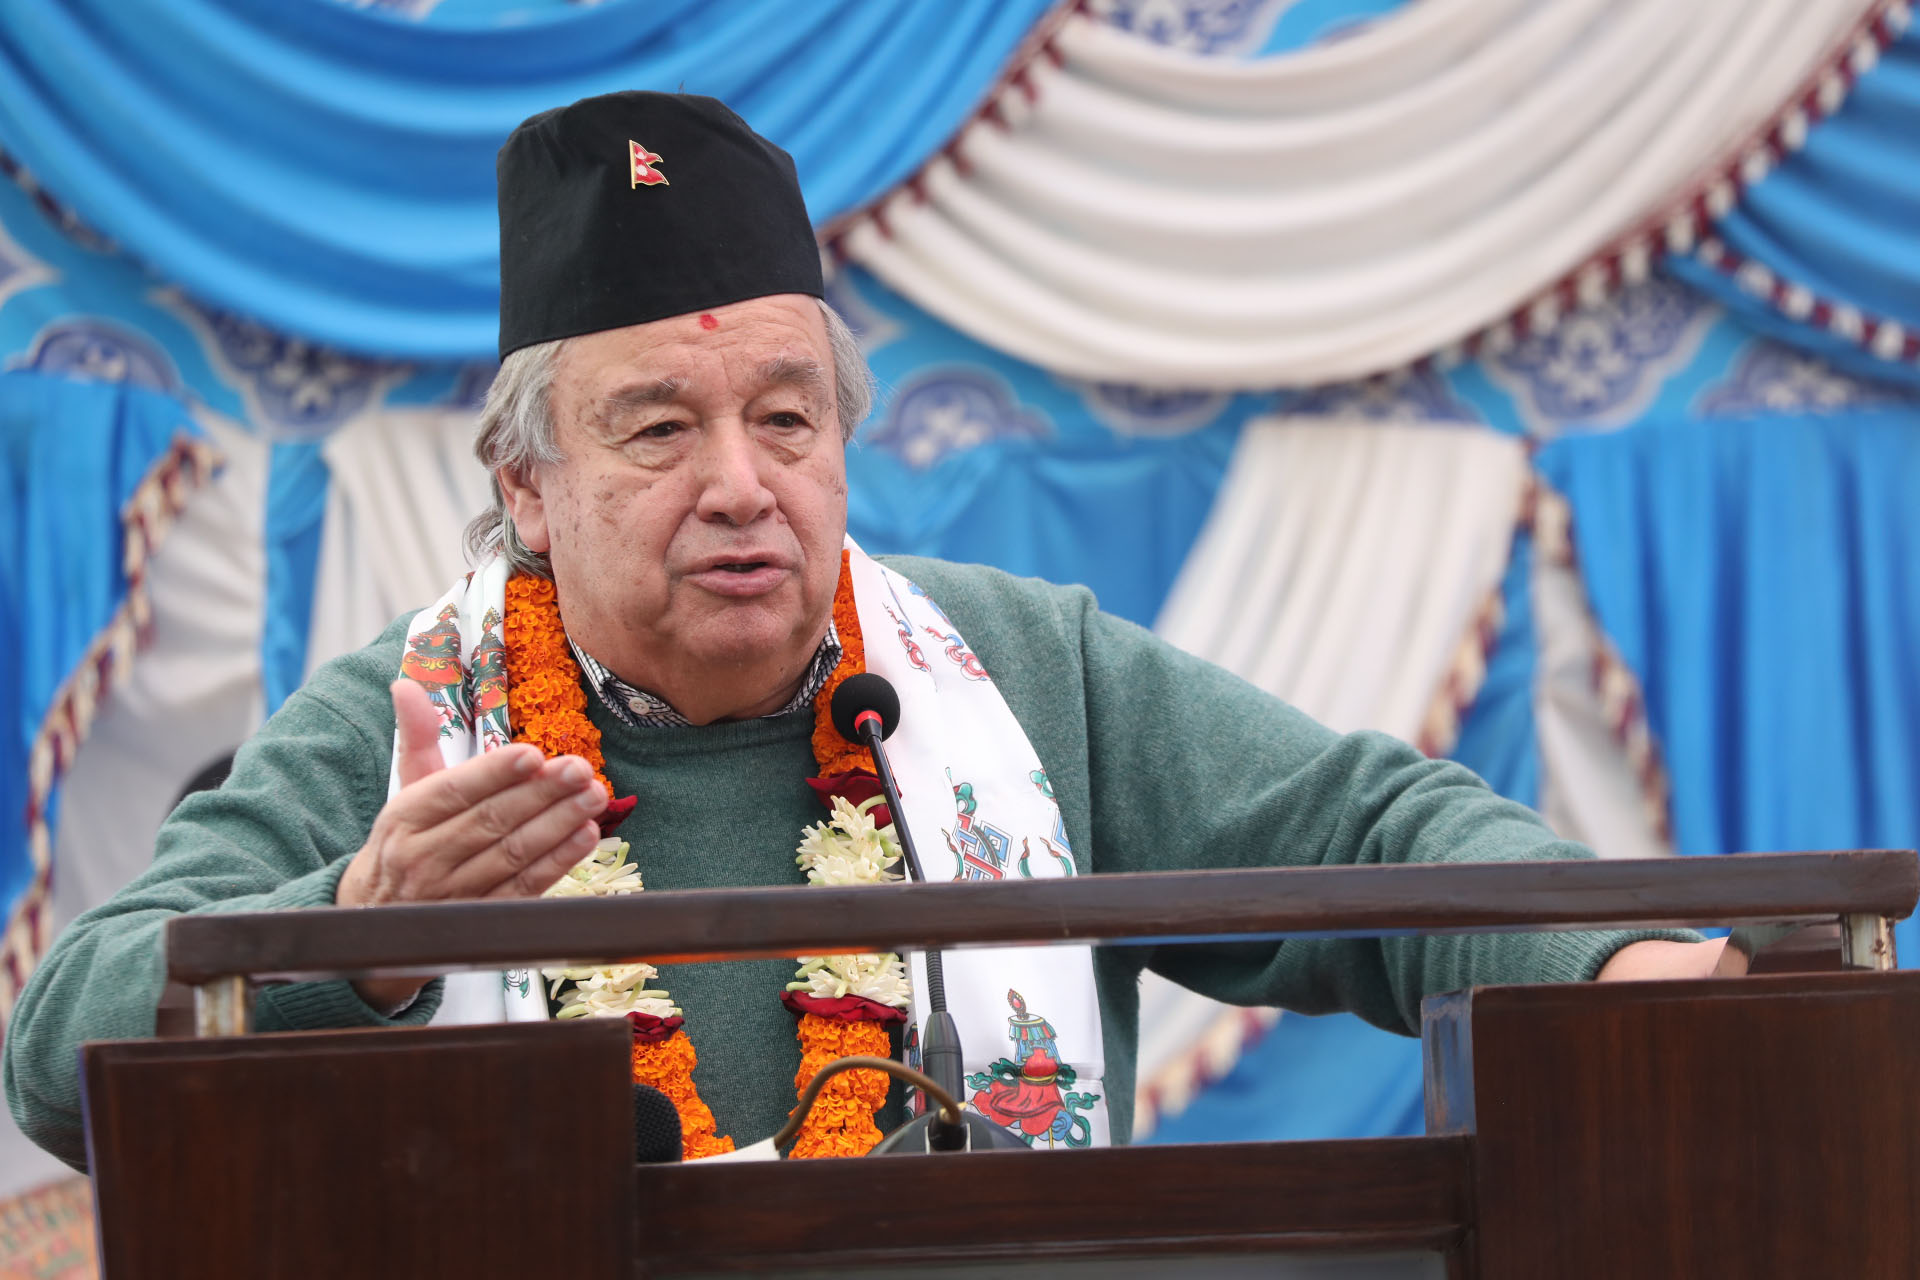 Guterres lauds Nepal's homegrown practices for peace